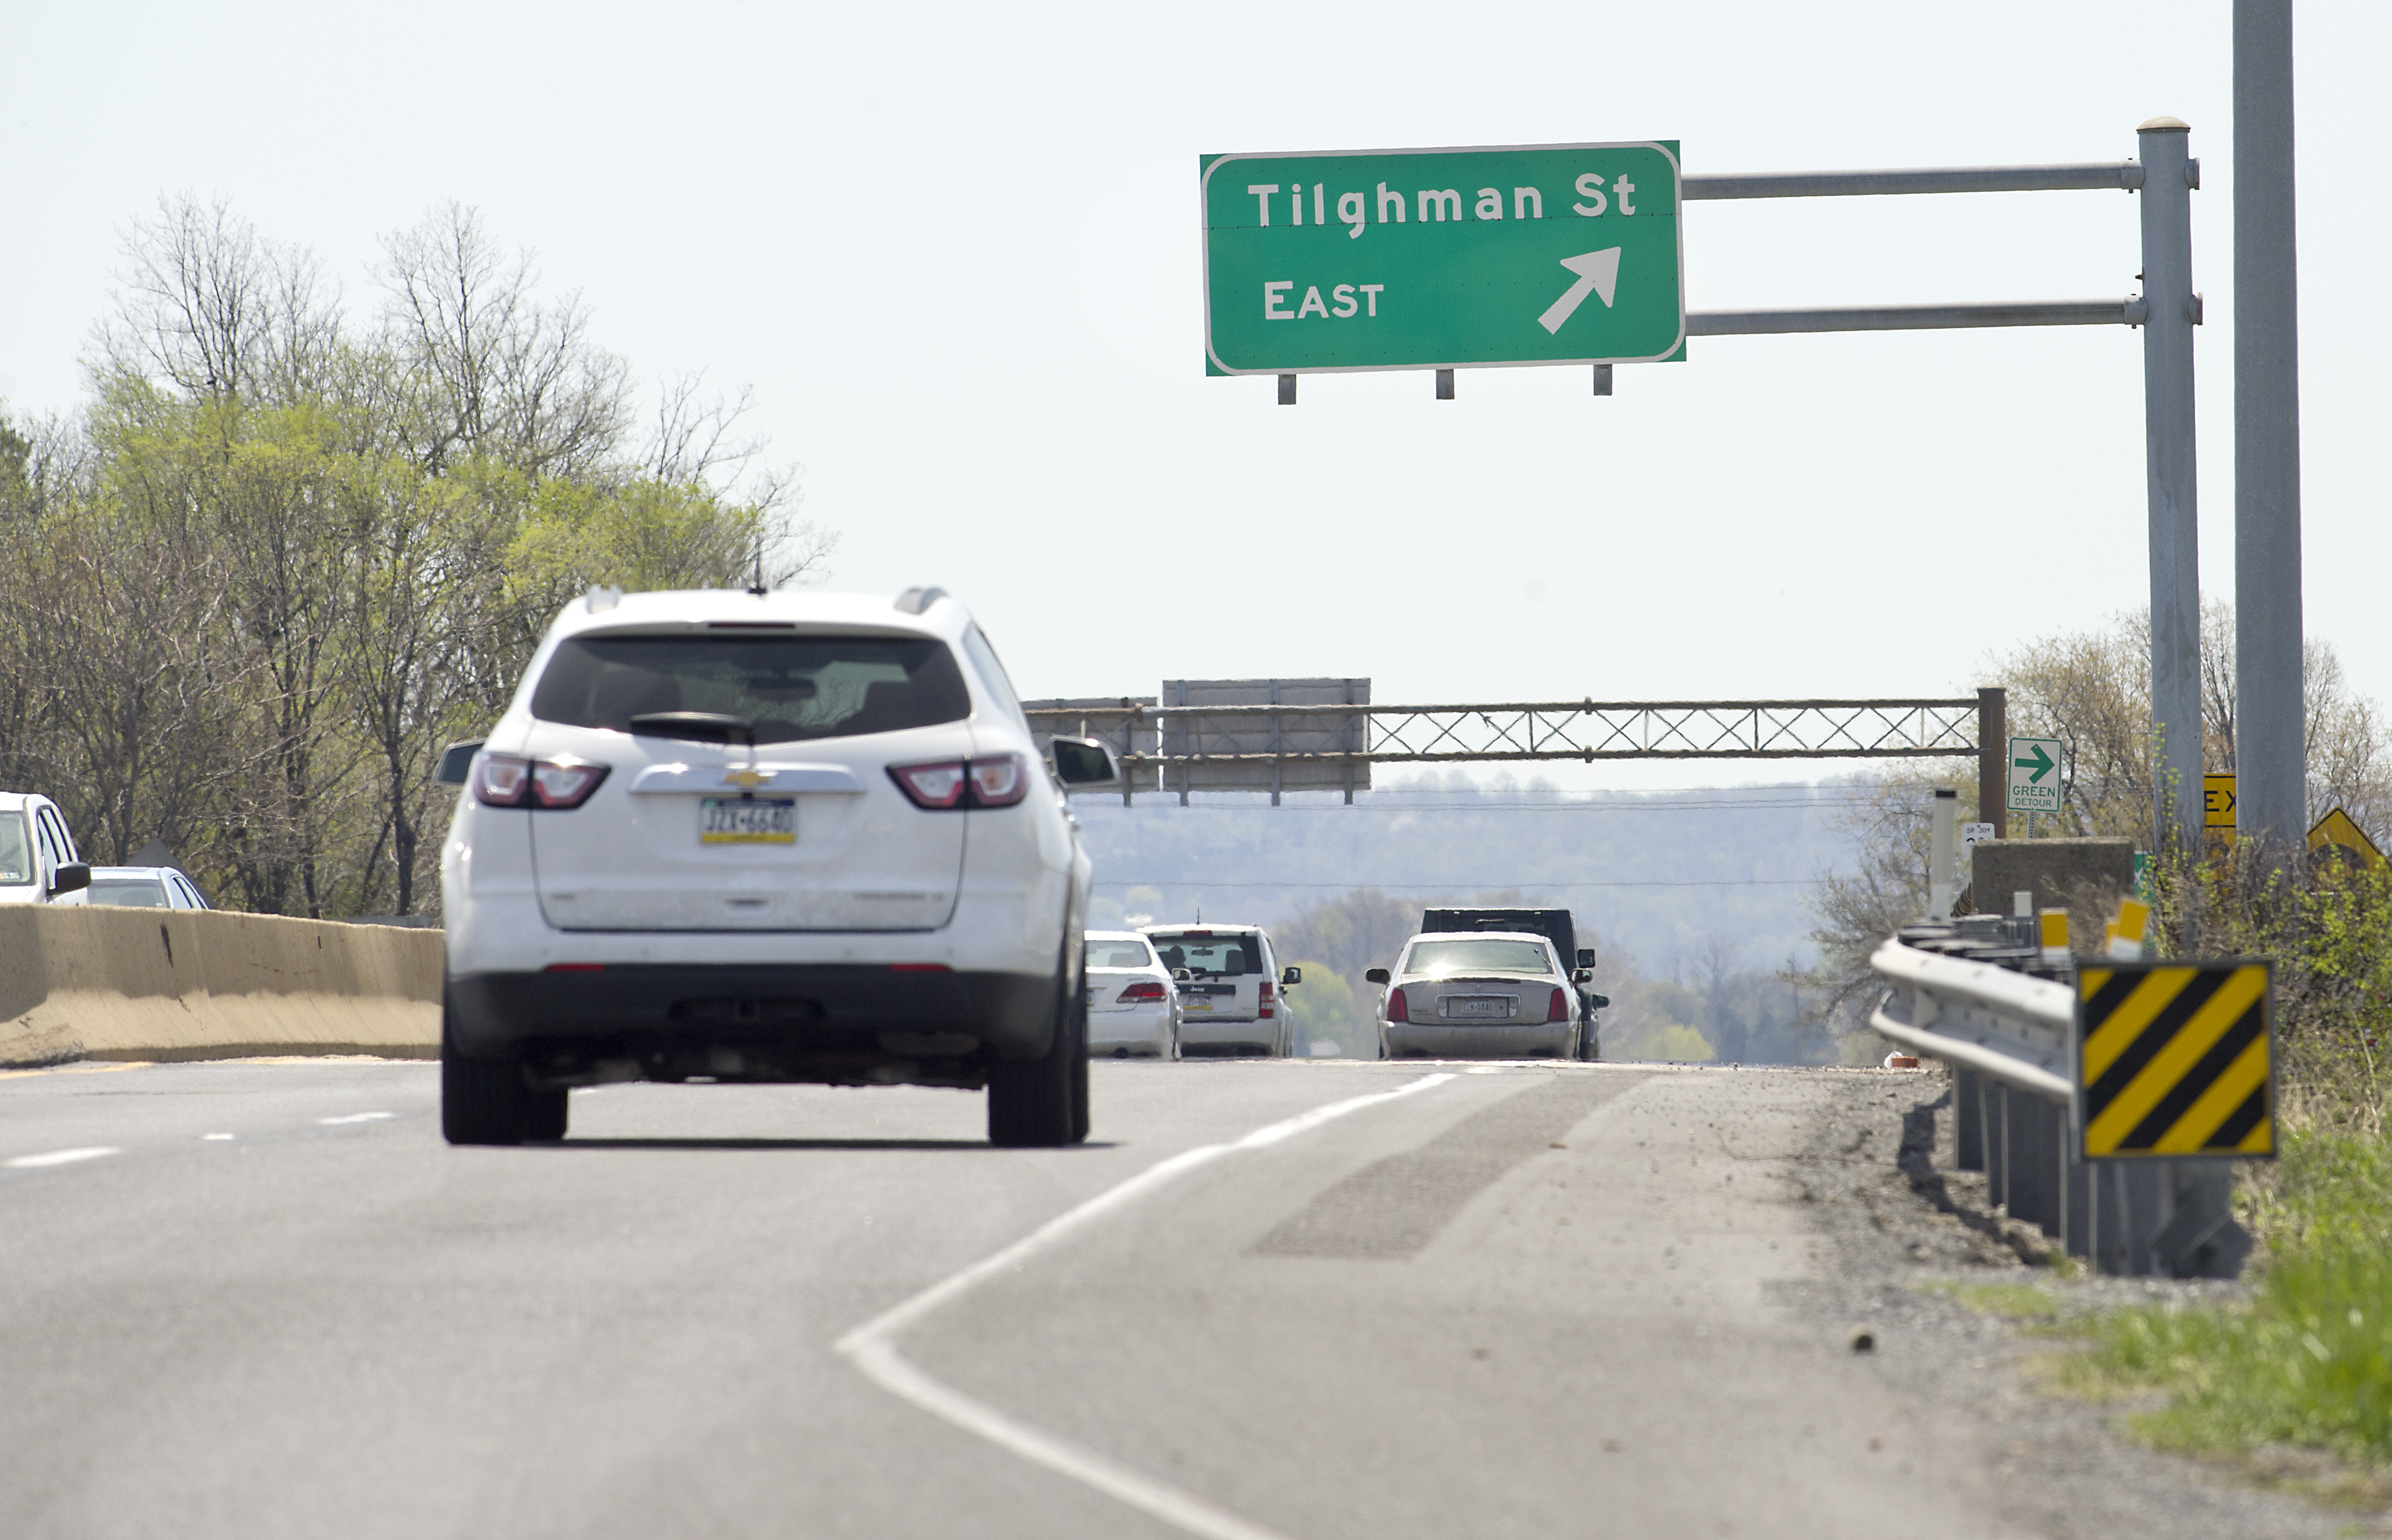 dangerous route 309/tilghman street interchange is set to be replaced. a $24 million boost will help make sure it’s done quickly.